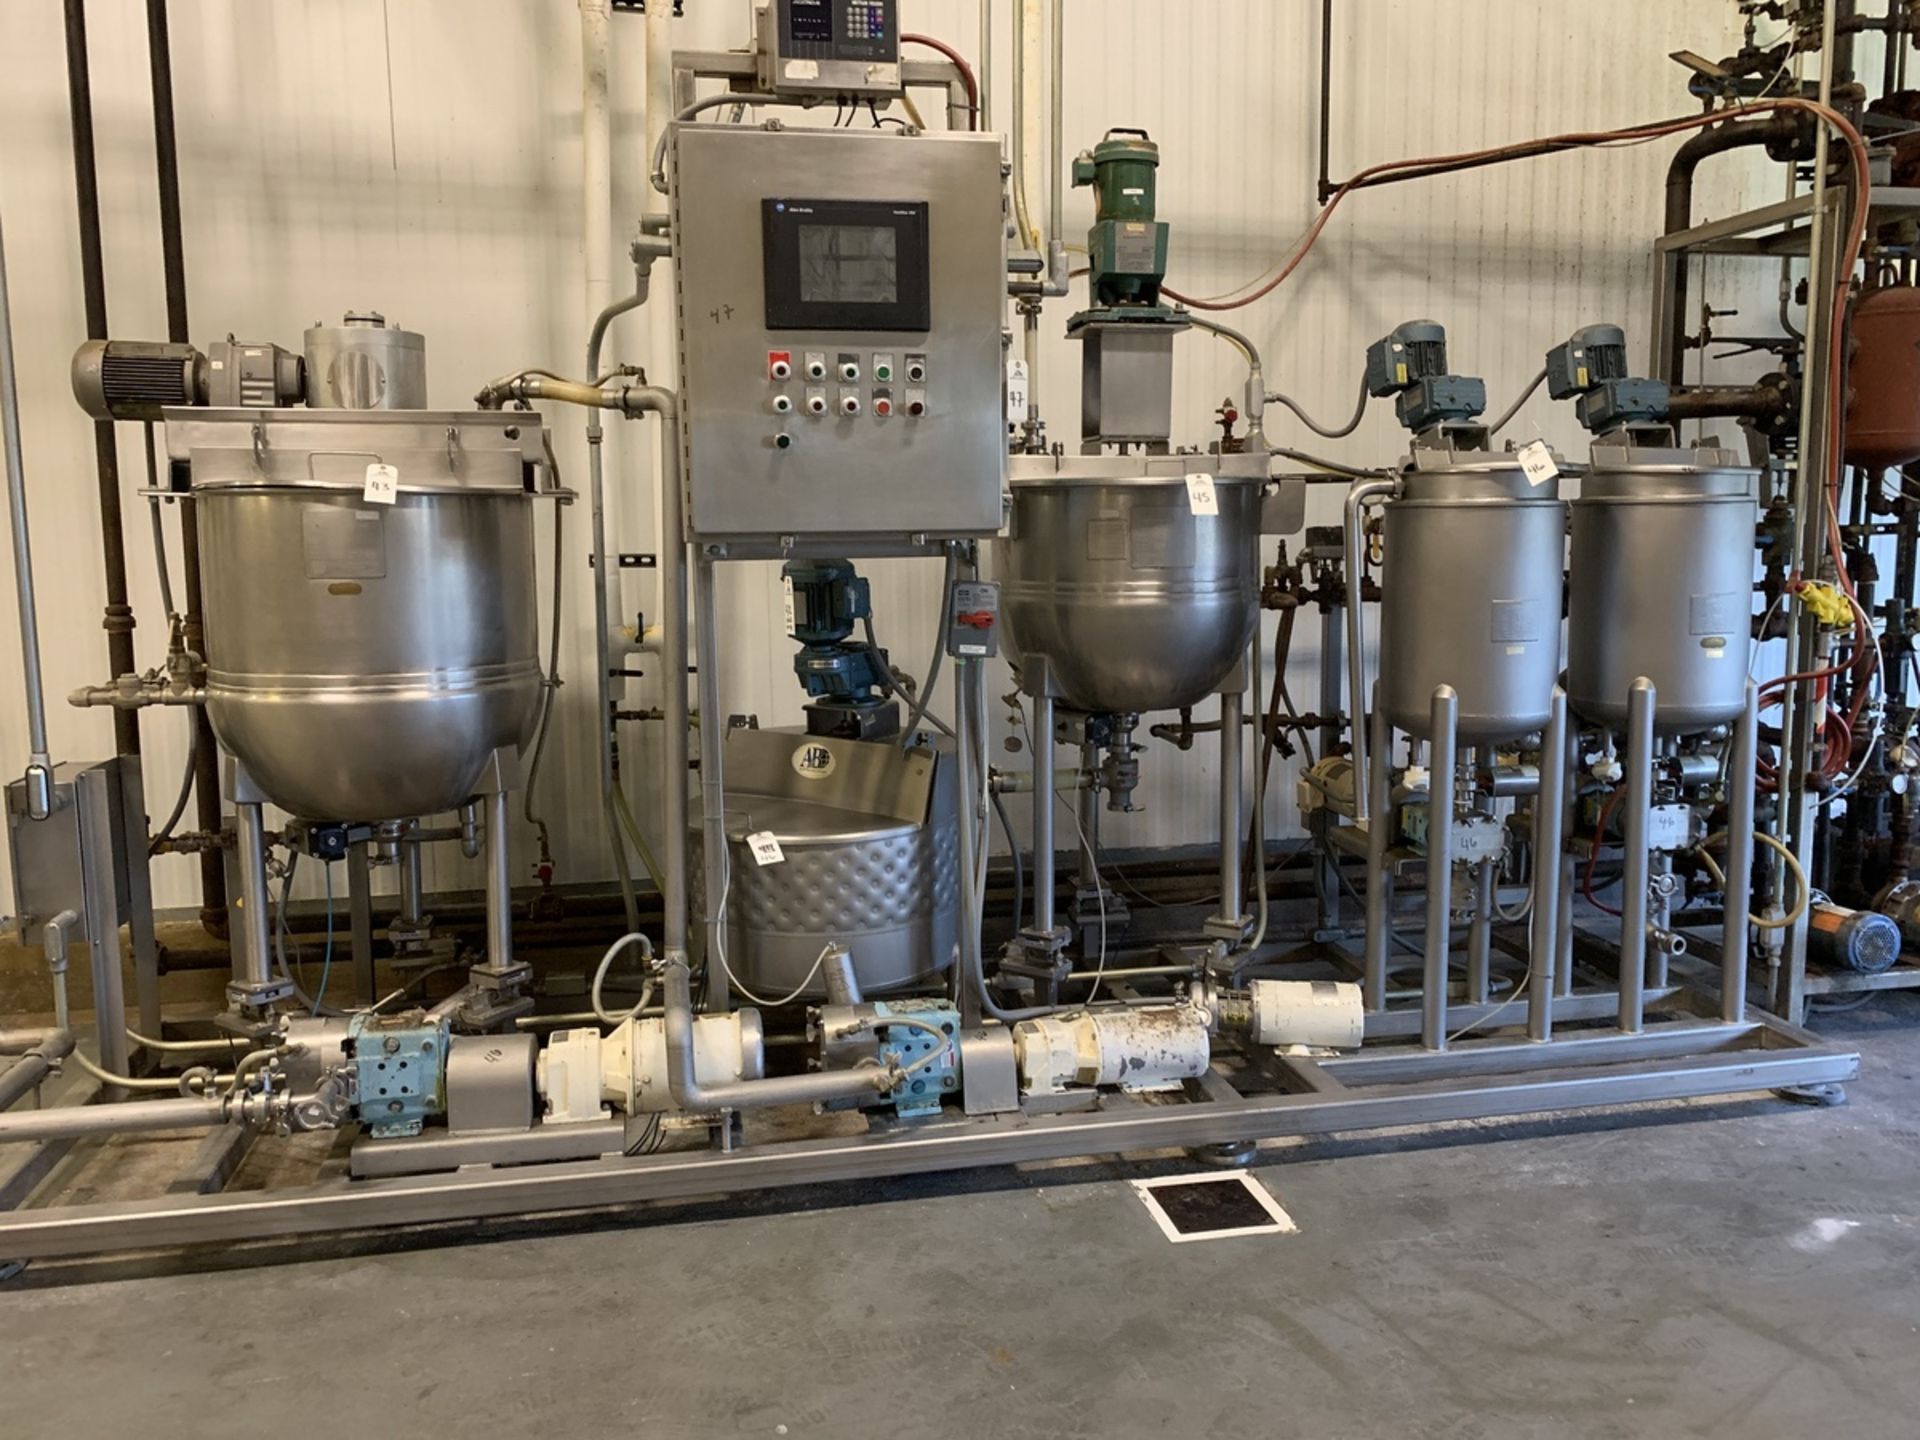 Bulk Bid Kettle Blending Skid Lot 43-48 | Subject to Piecemeal | Rig Fee: 400 Loaded Out As a Skid - Image 2 of 2